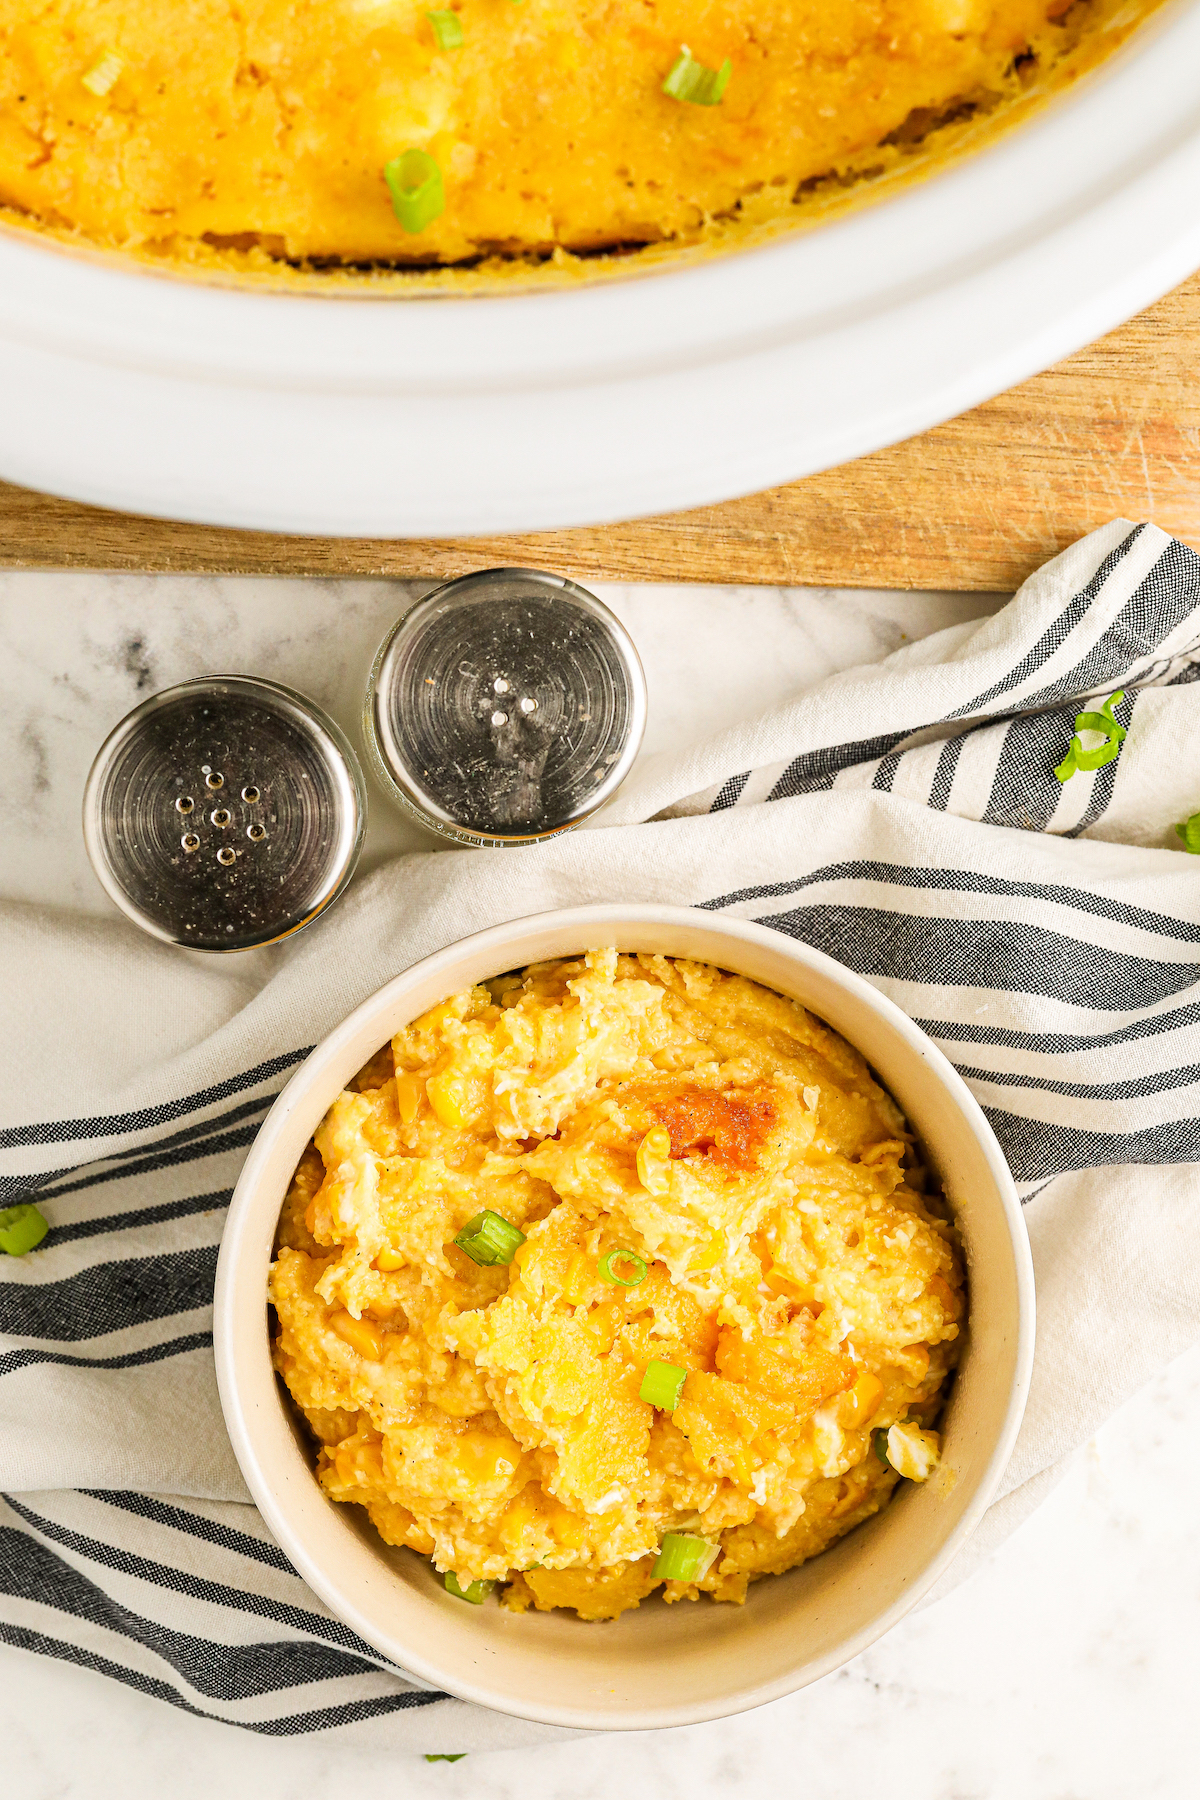 A serving of sweet and creamy crockpot corn casserole in a bowl topped with sliced green onions with a crockpot full of corn pudding in the background.